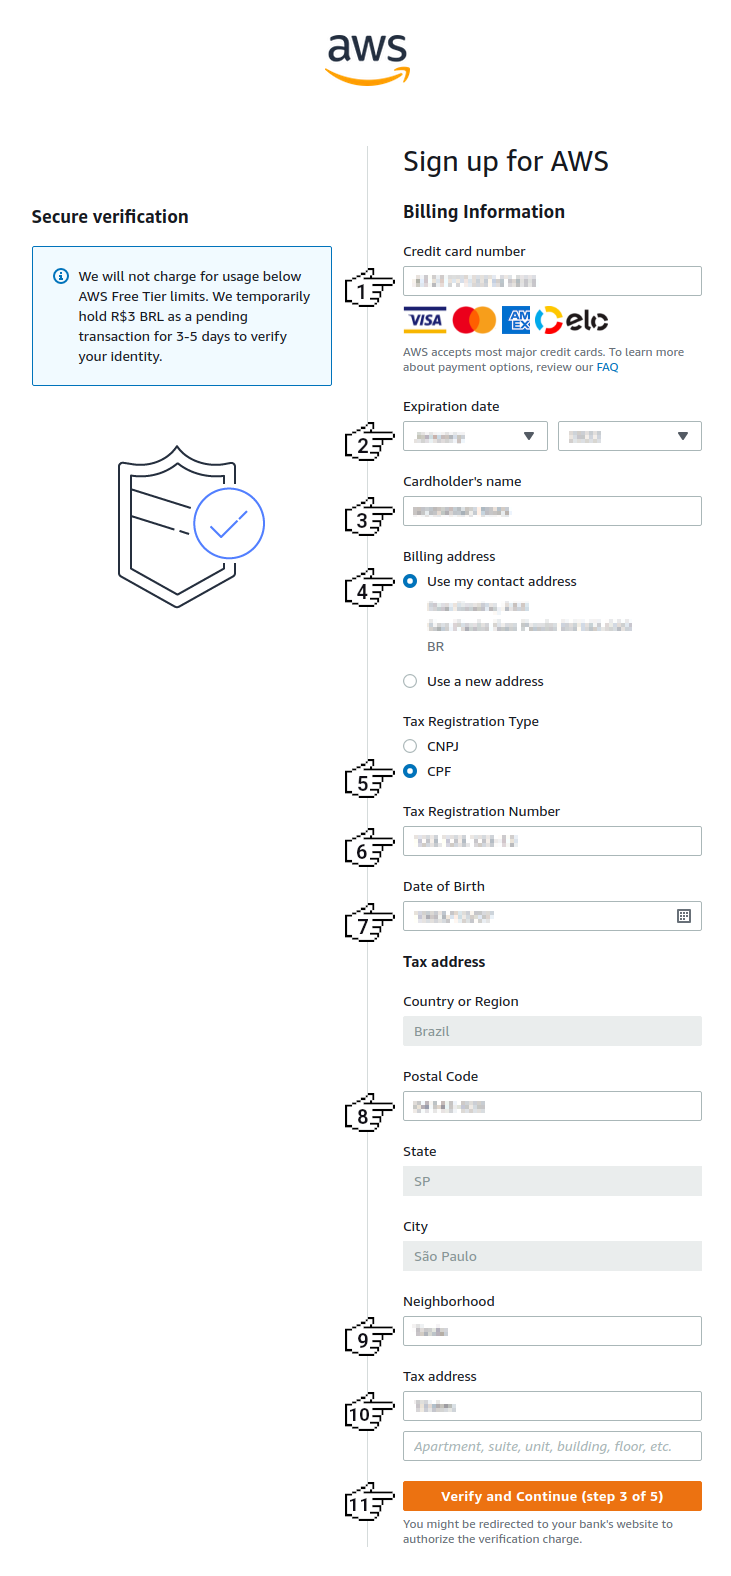 Amazon Cognito - Sign up for AWS (step 3 of 5)